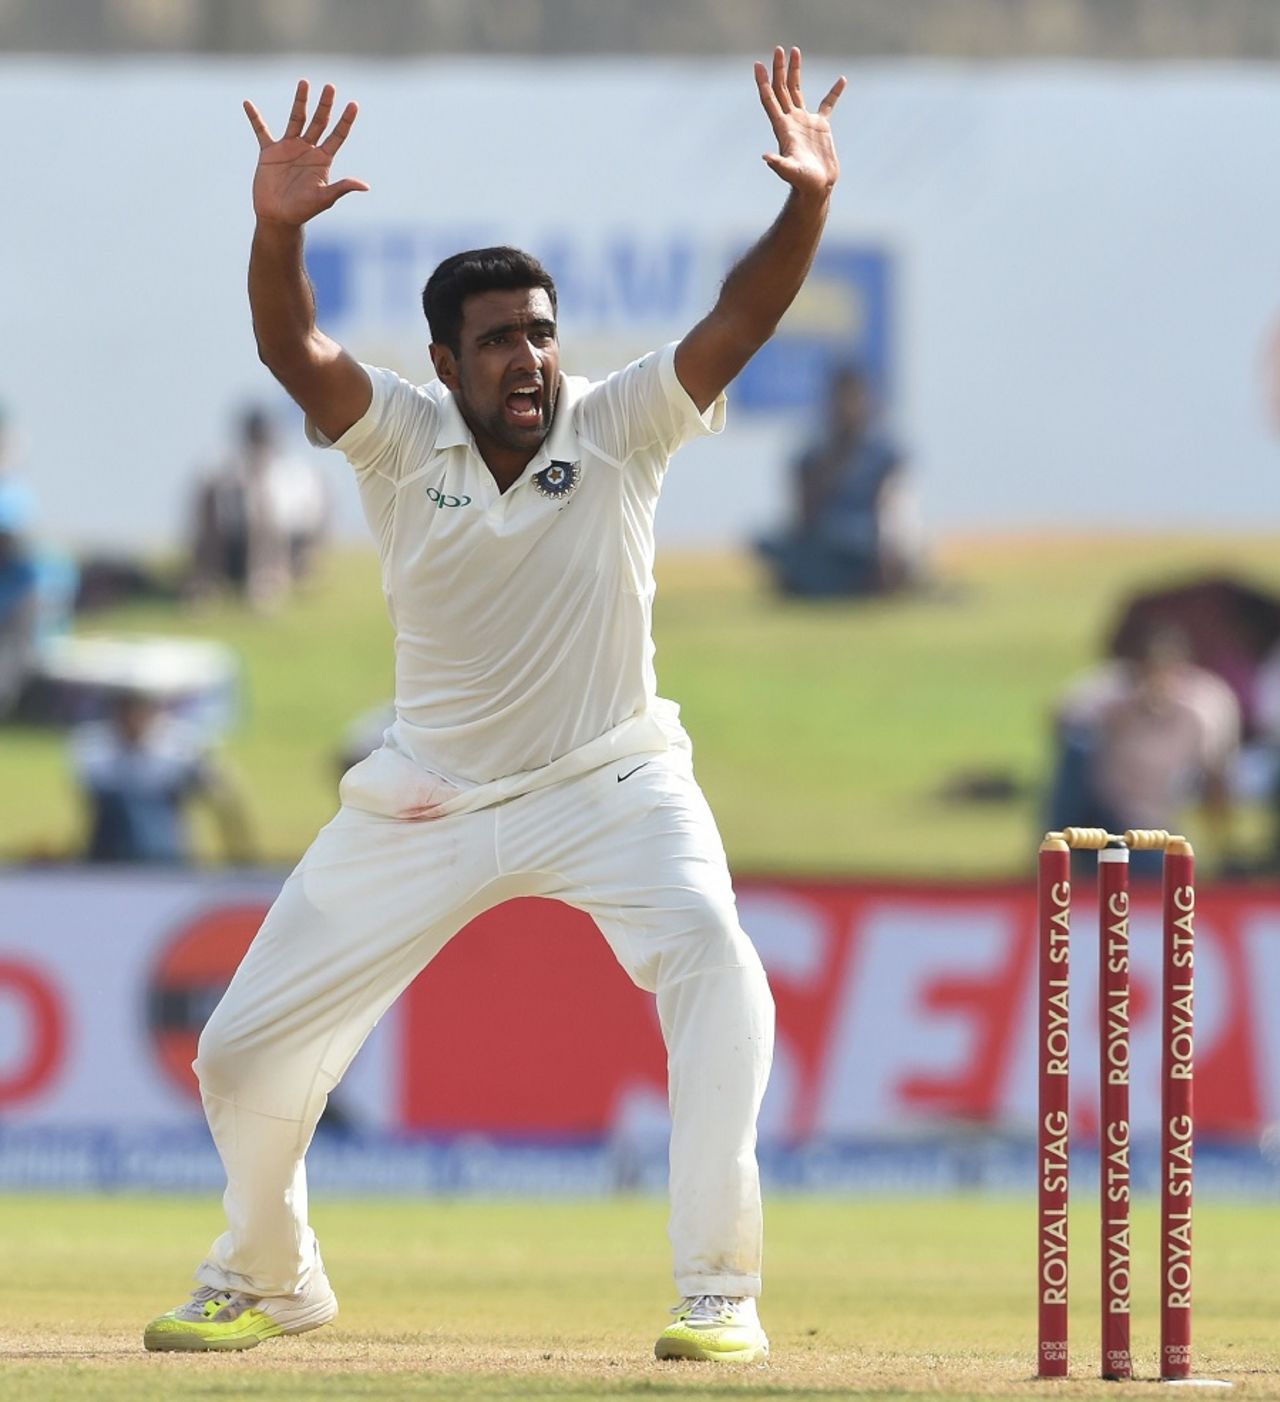 R Ashwin got drift and dip to be a constant threat, Sri Lanka v India, 1st Test, Galle, 2nd day, July 27, 2017